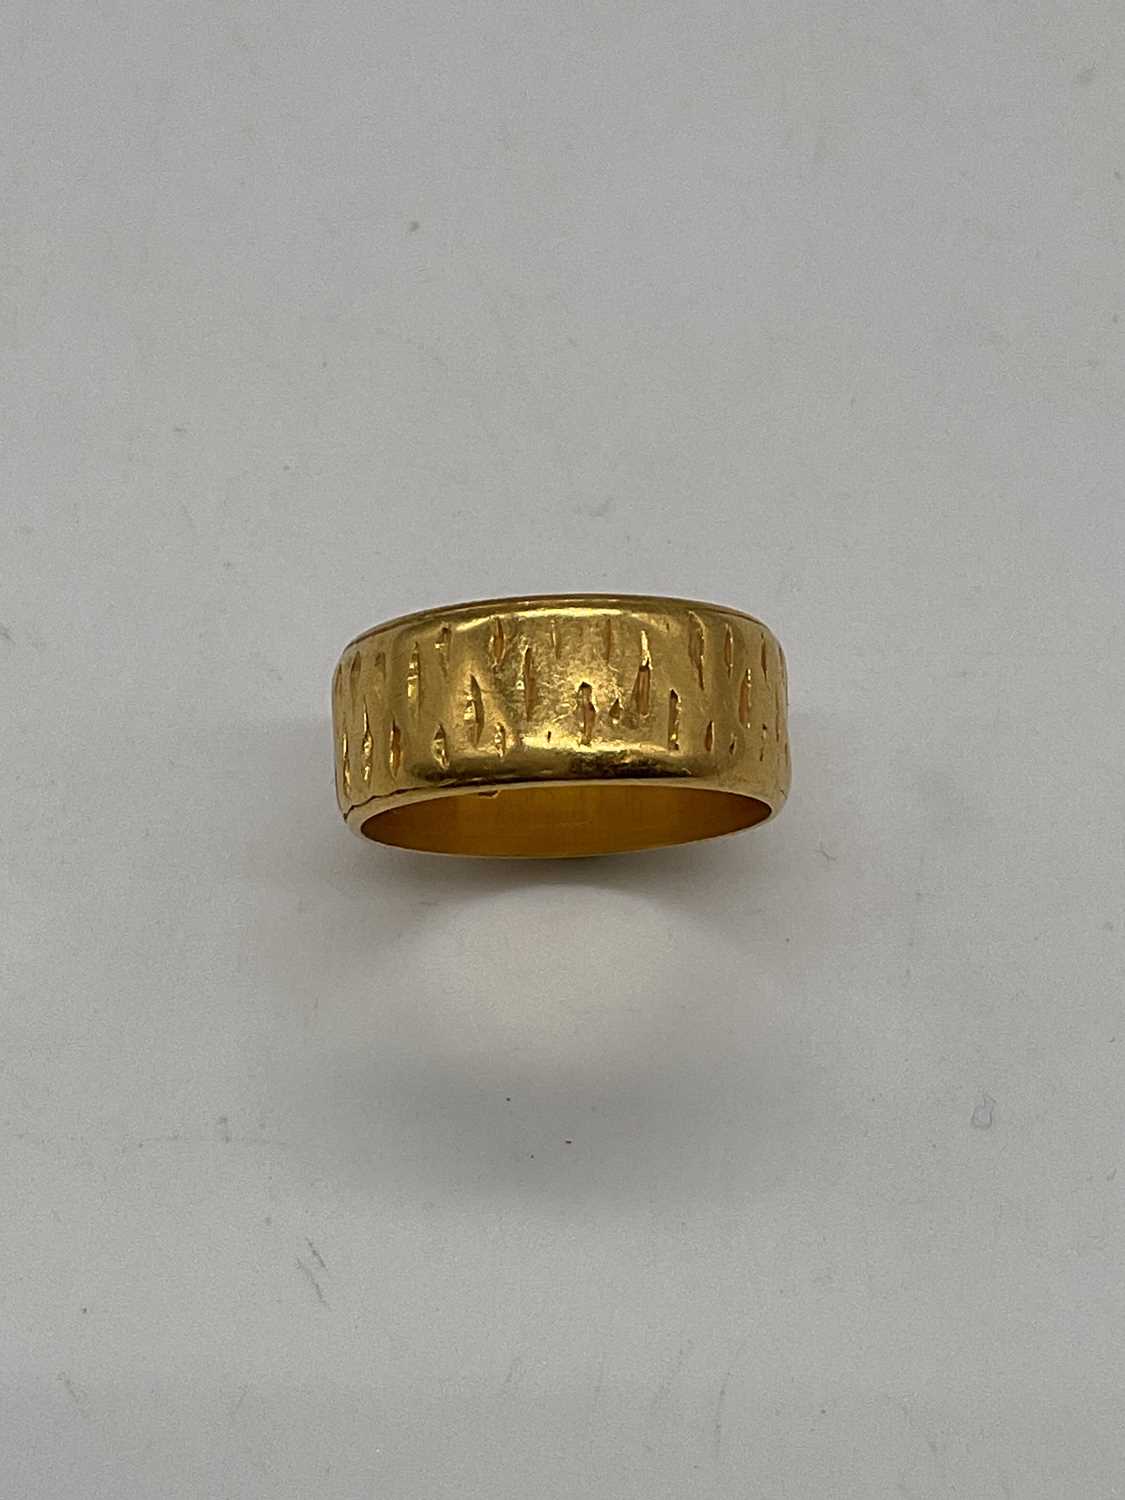 A 22ct yellow gold wedding band with engraved detail and inscription to the inner band, size K 1/ - Image 2 of 4